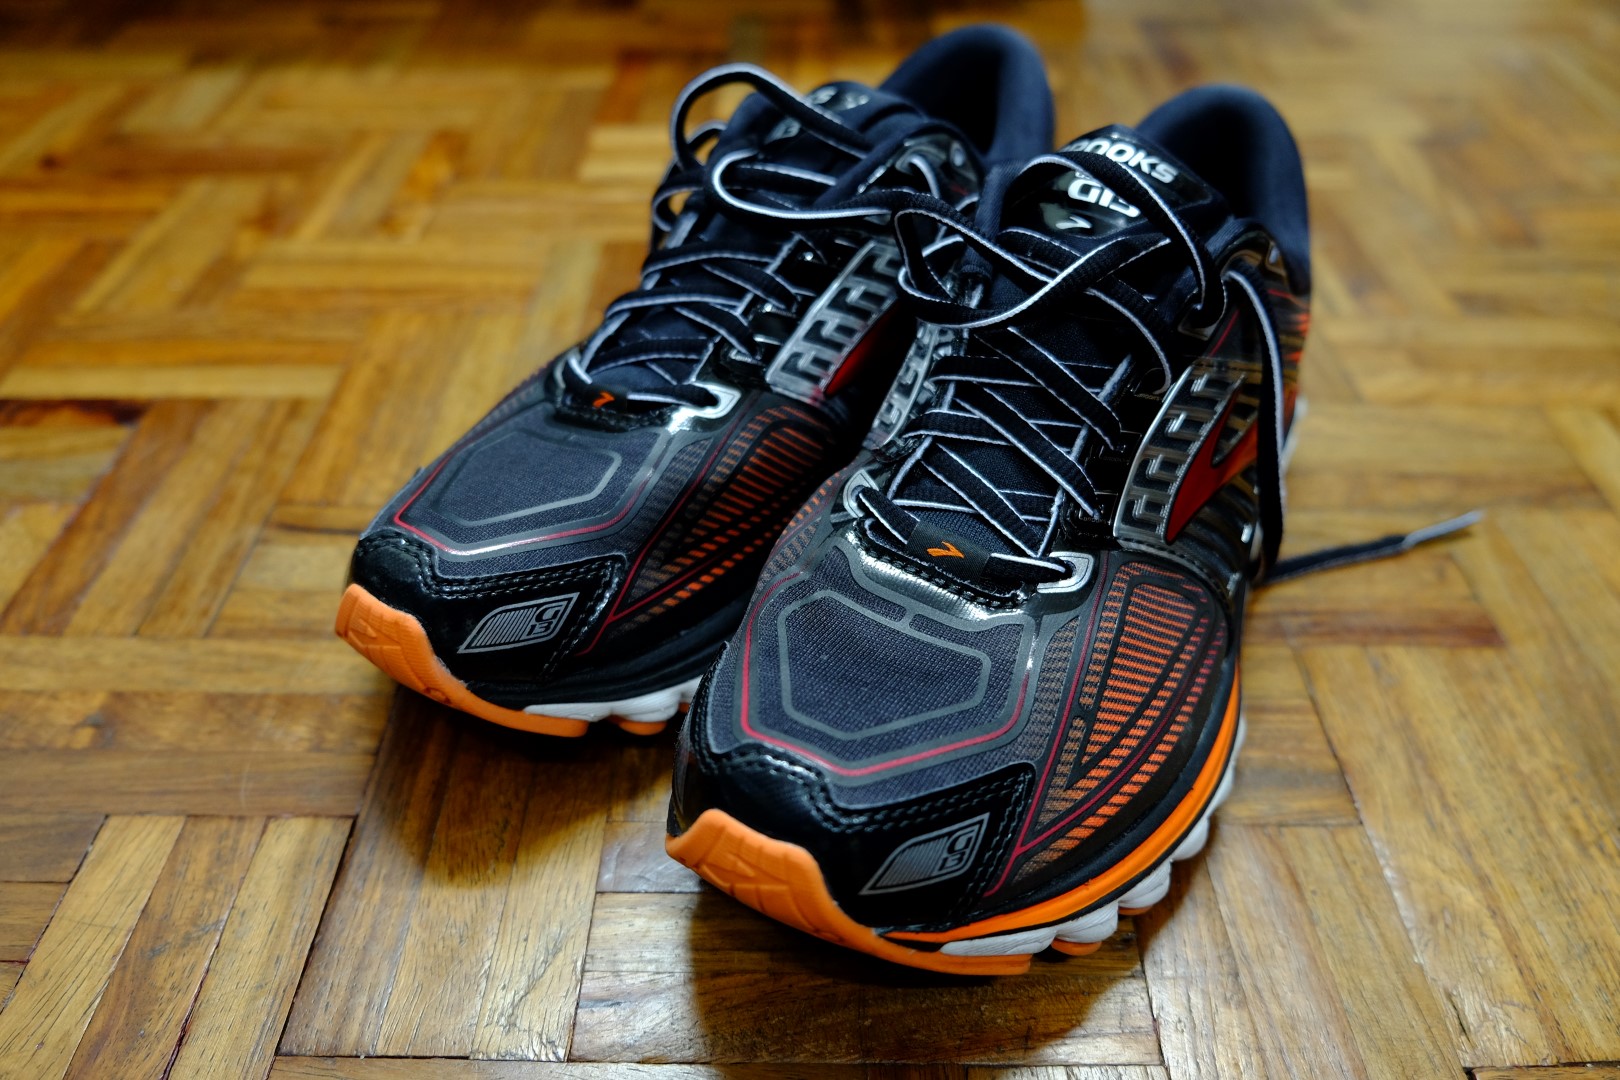 glycerin 13 brooks review